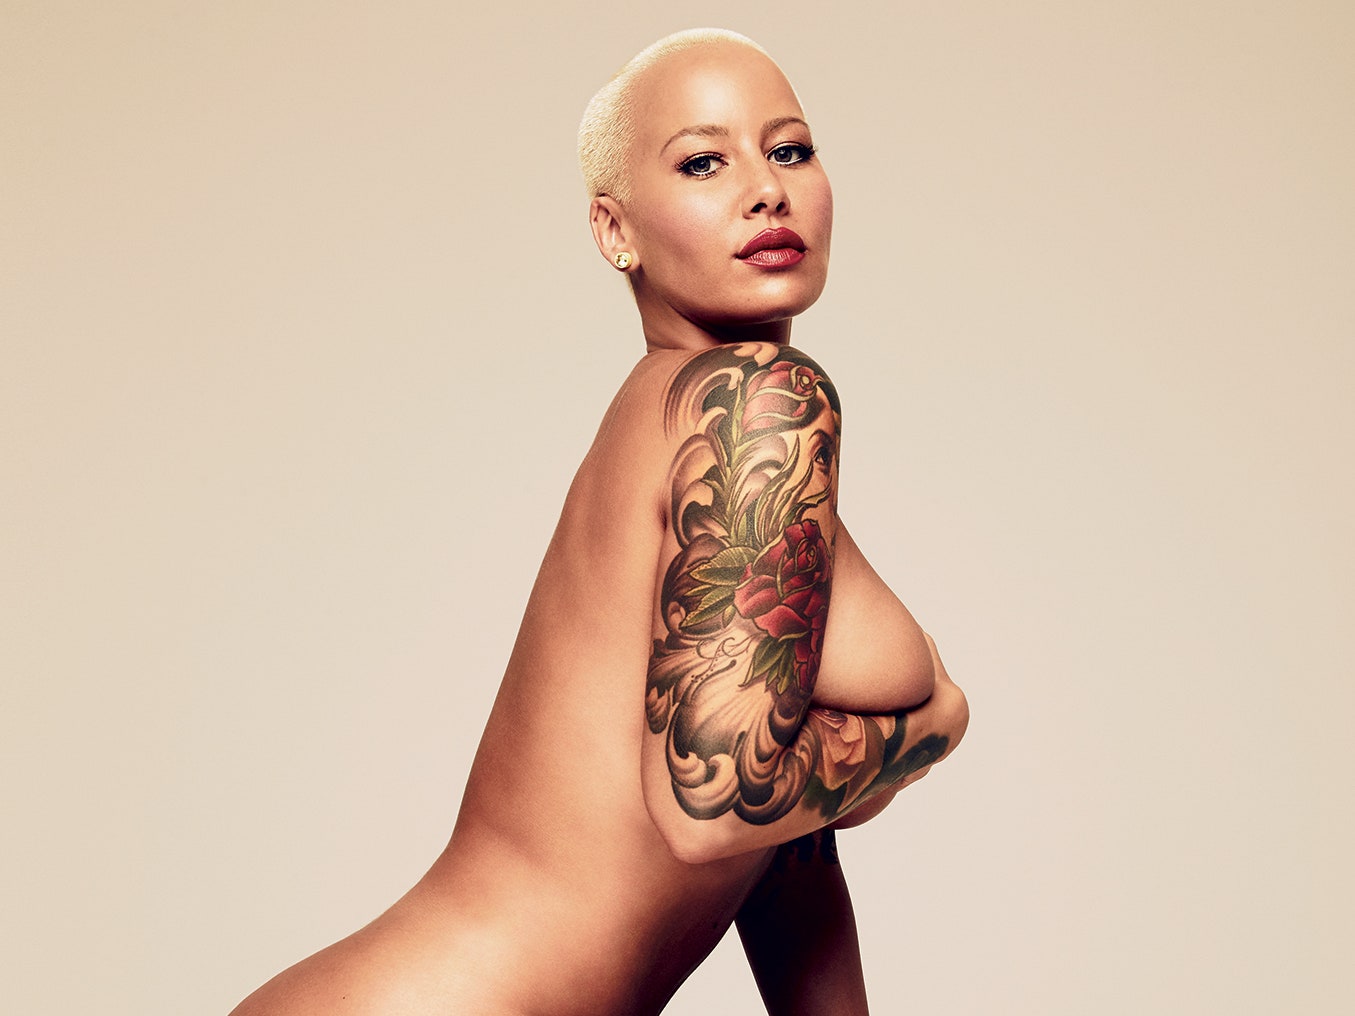 aida clinton recommends amber rose butt naked pic